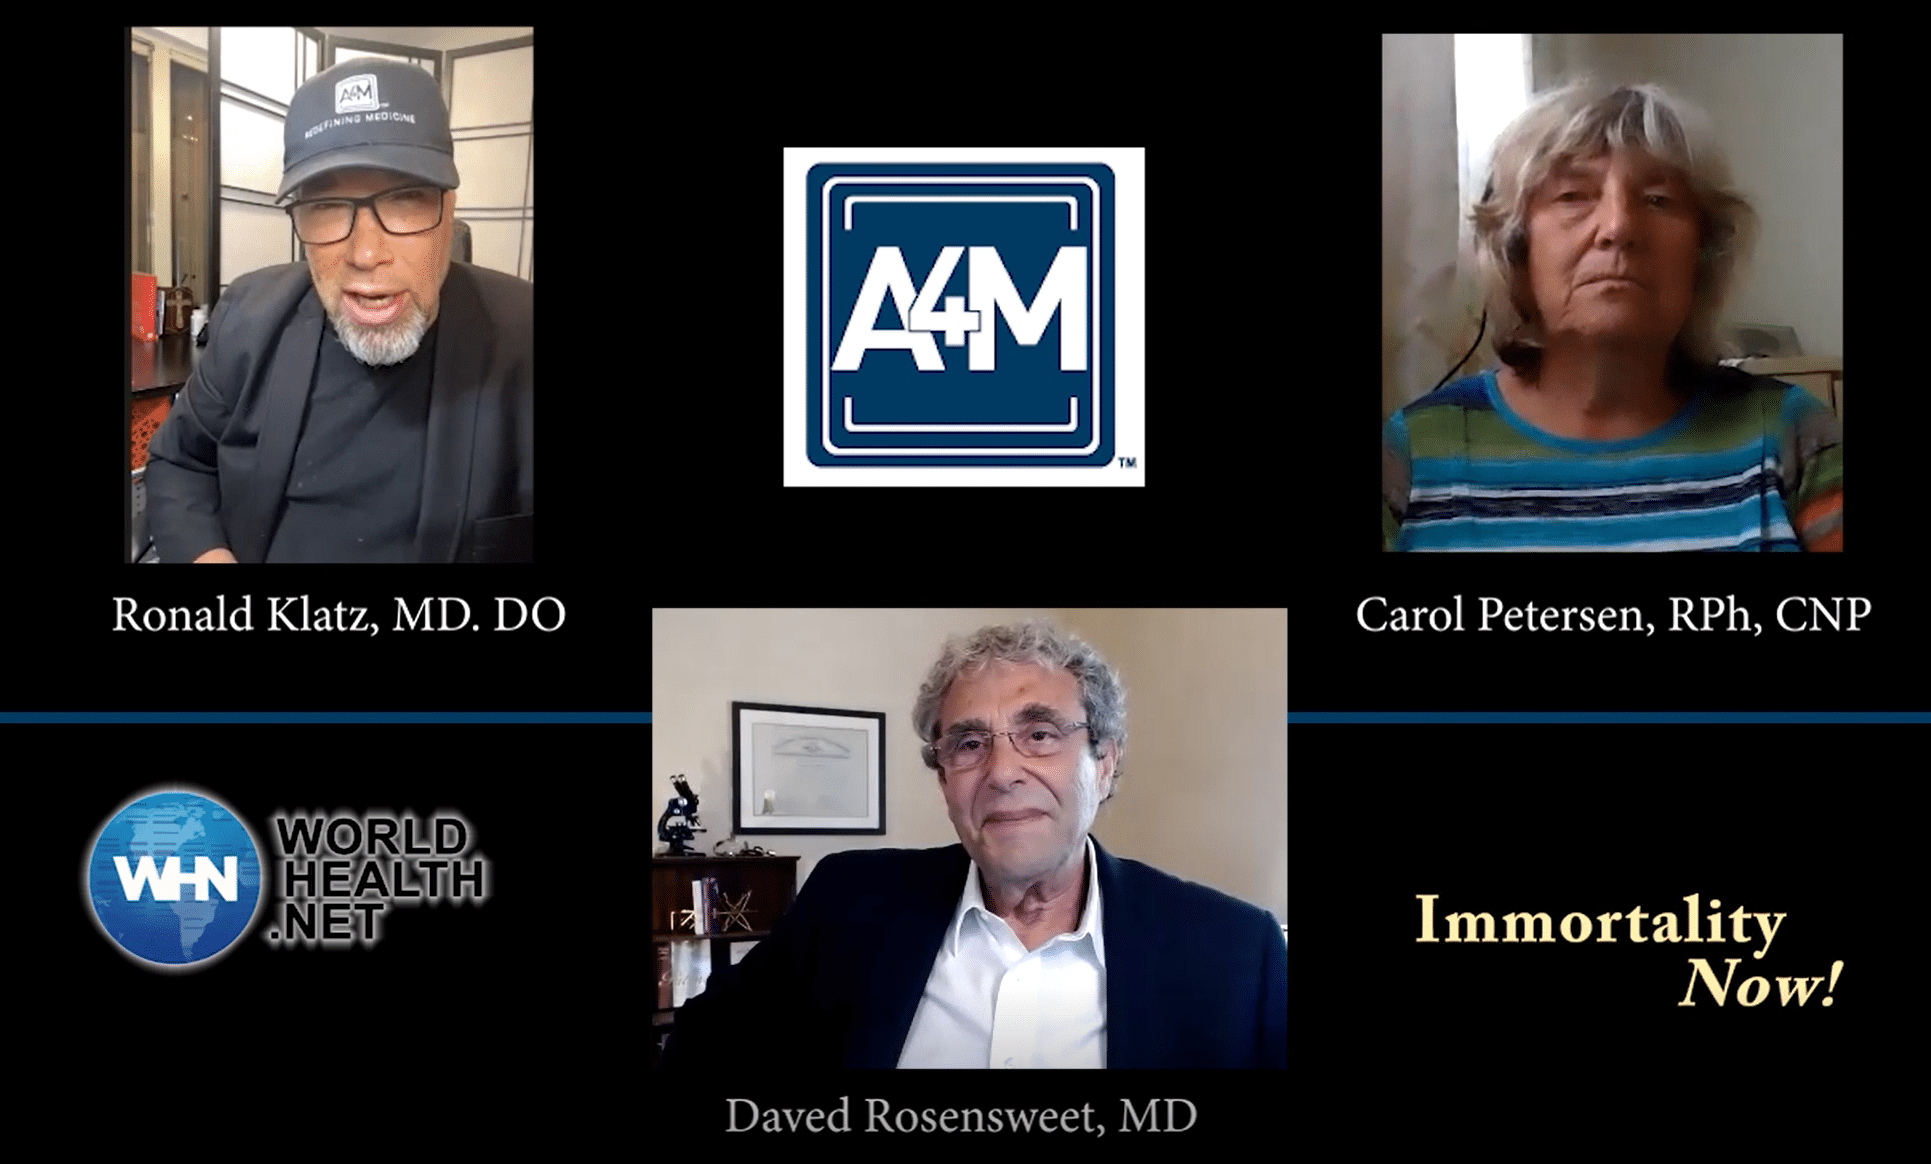 Dr. Ronald Klatz and Carol Petersen feature an episode of” Immortality Now” interviewing Dr. Daved Rosensweet on the FDA’s positioning to threaten the availability of compounded bioidentical hormone therapies.